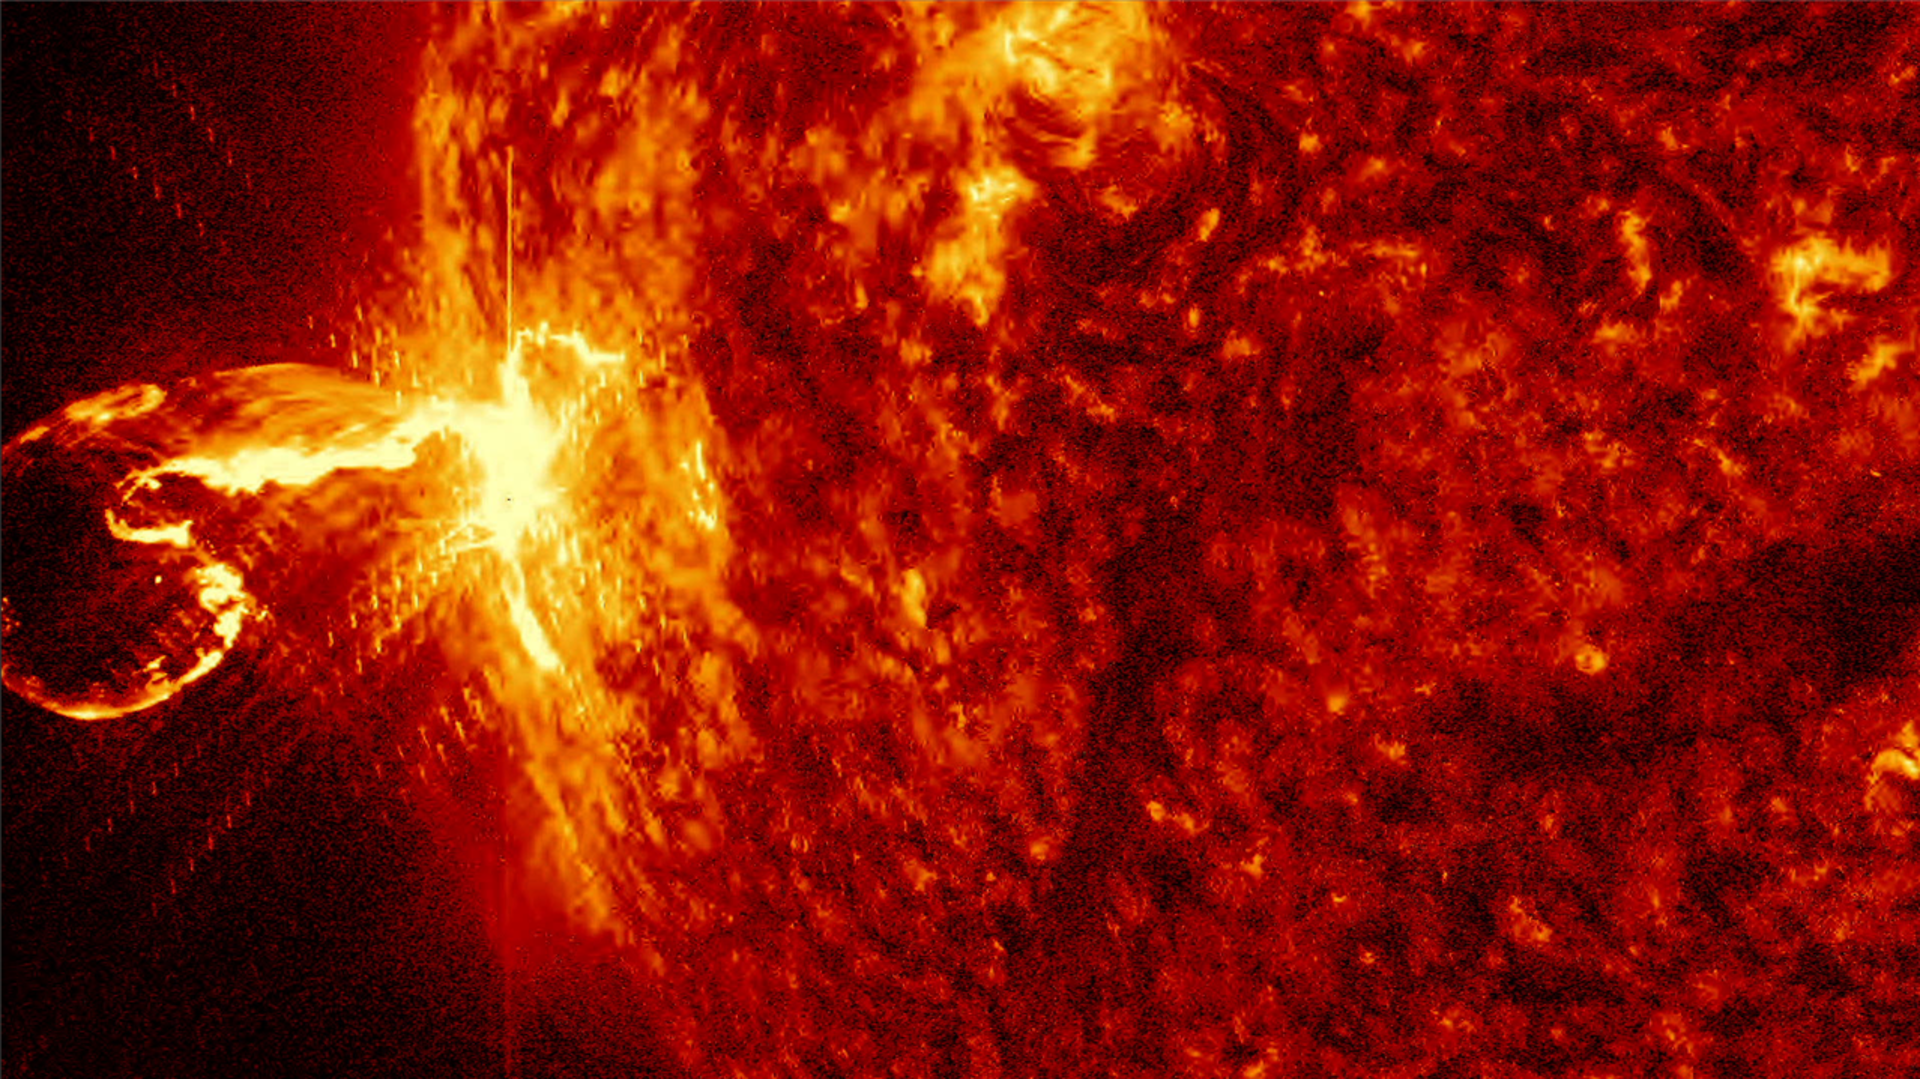 CME might hit Earth tomorrow: Know what caused it